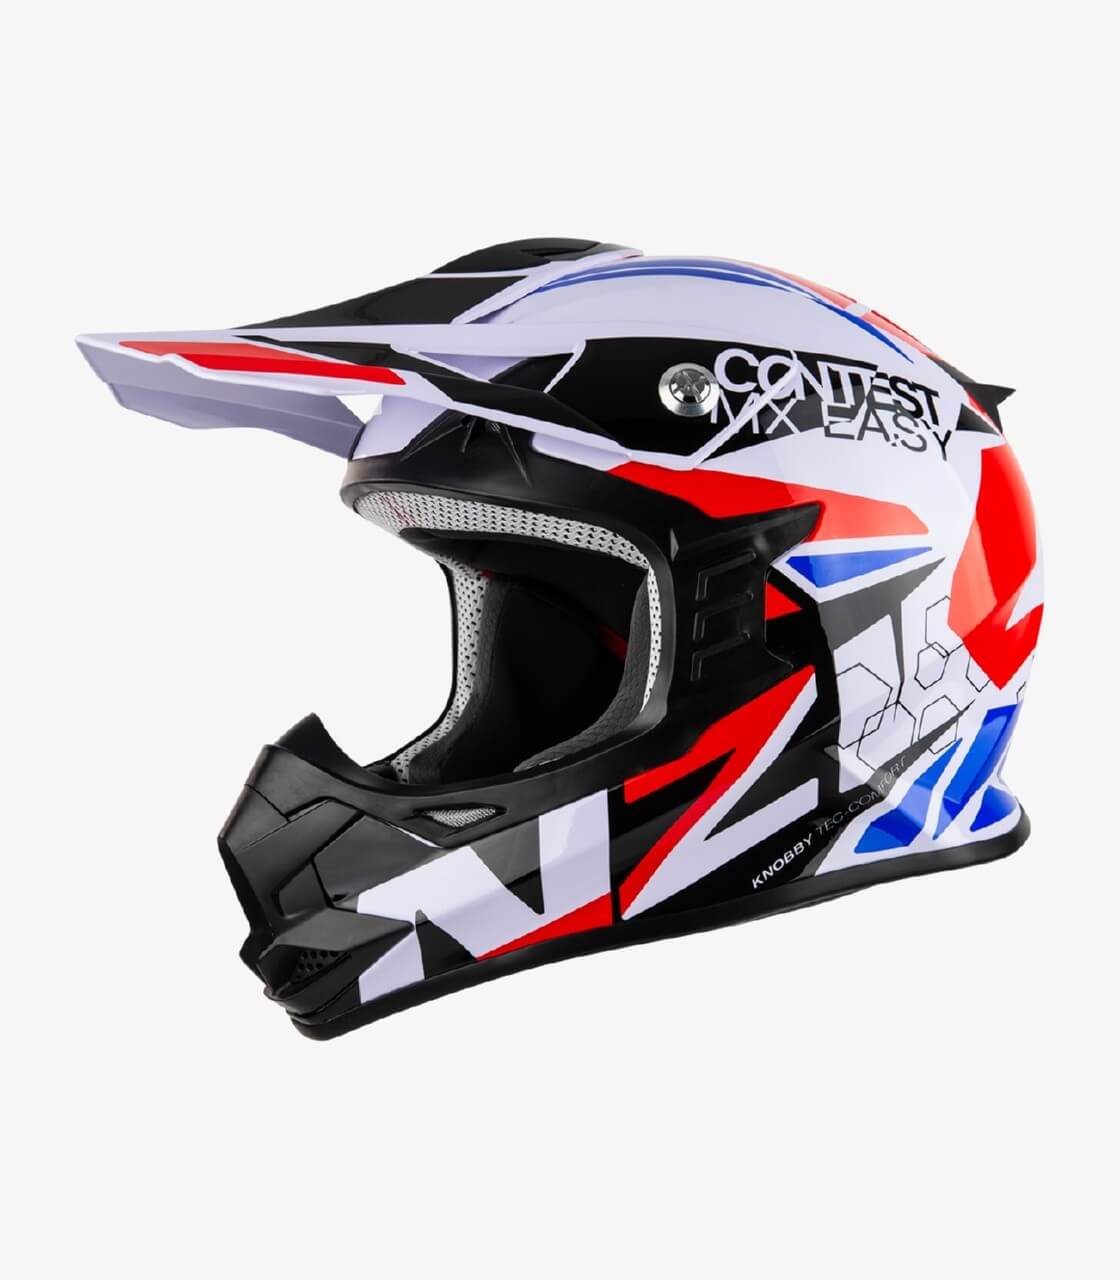 NZI Enduro and motocross helmet in white, blue and red color.